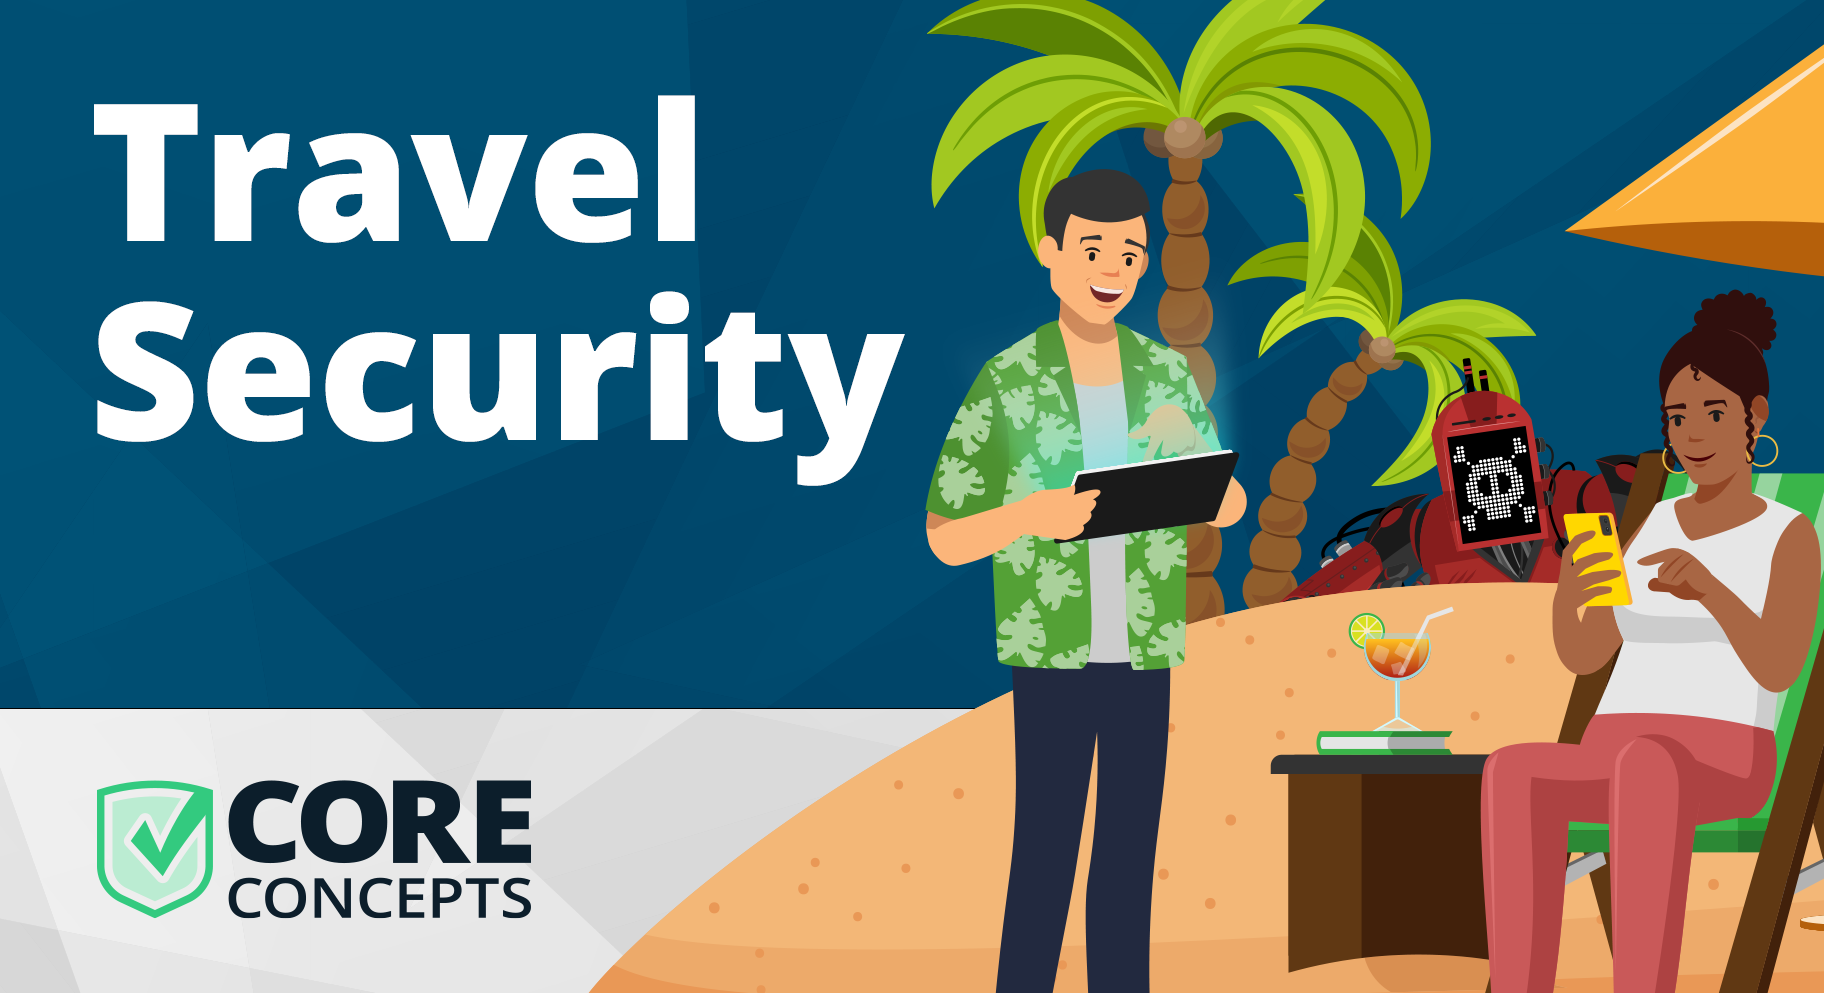 Core Concepts: Travel Security